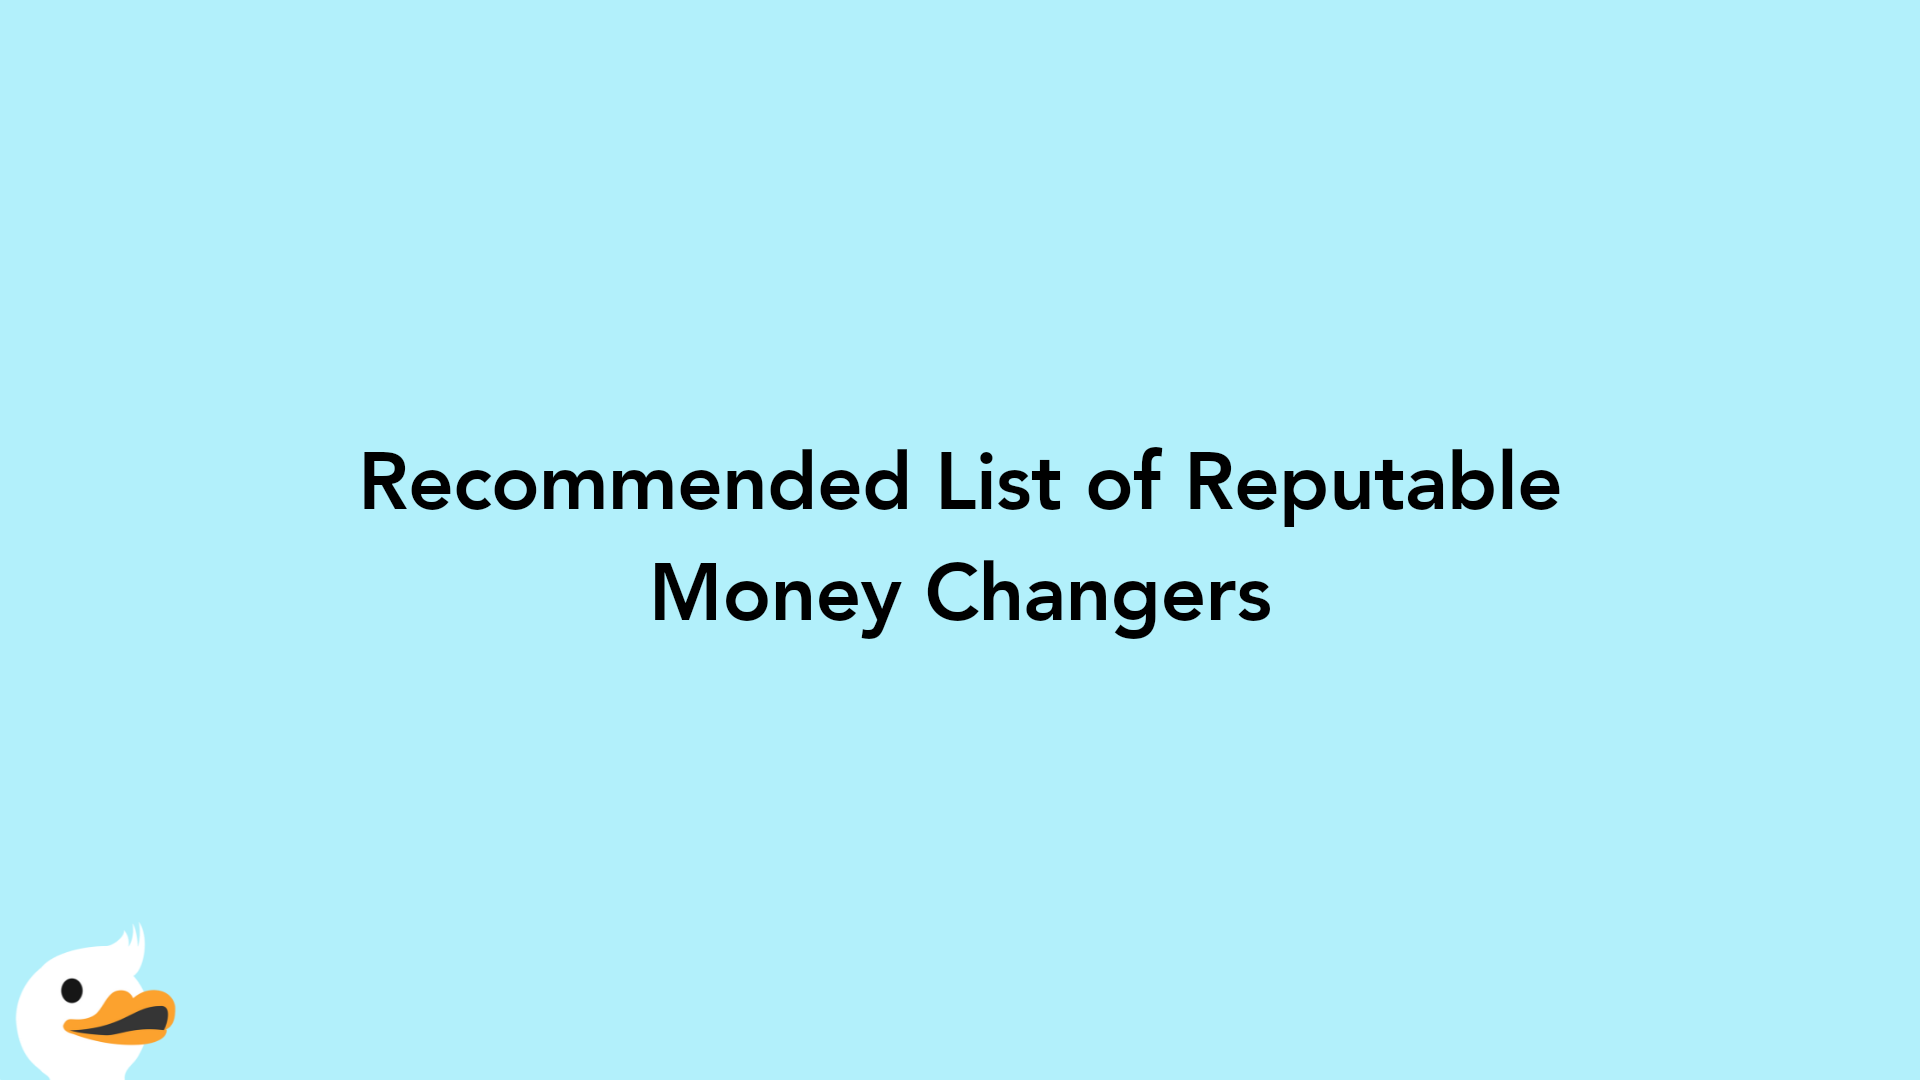 Recommended List of Reputable Money Changers